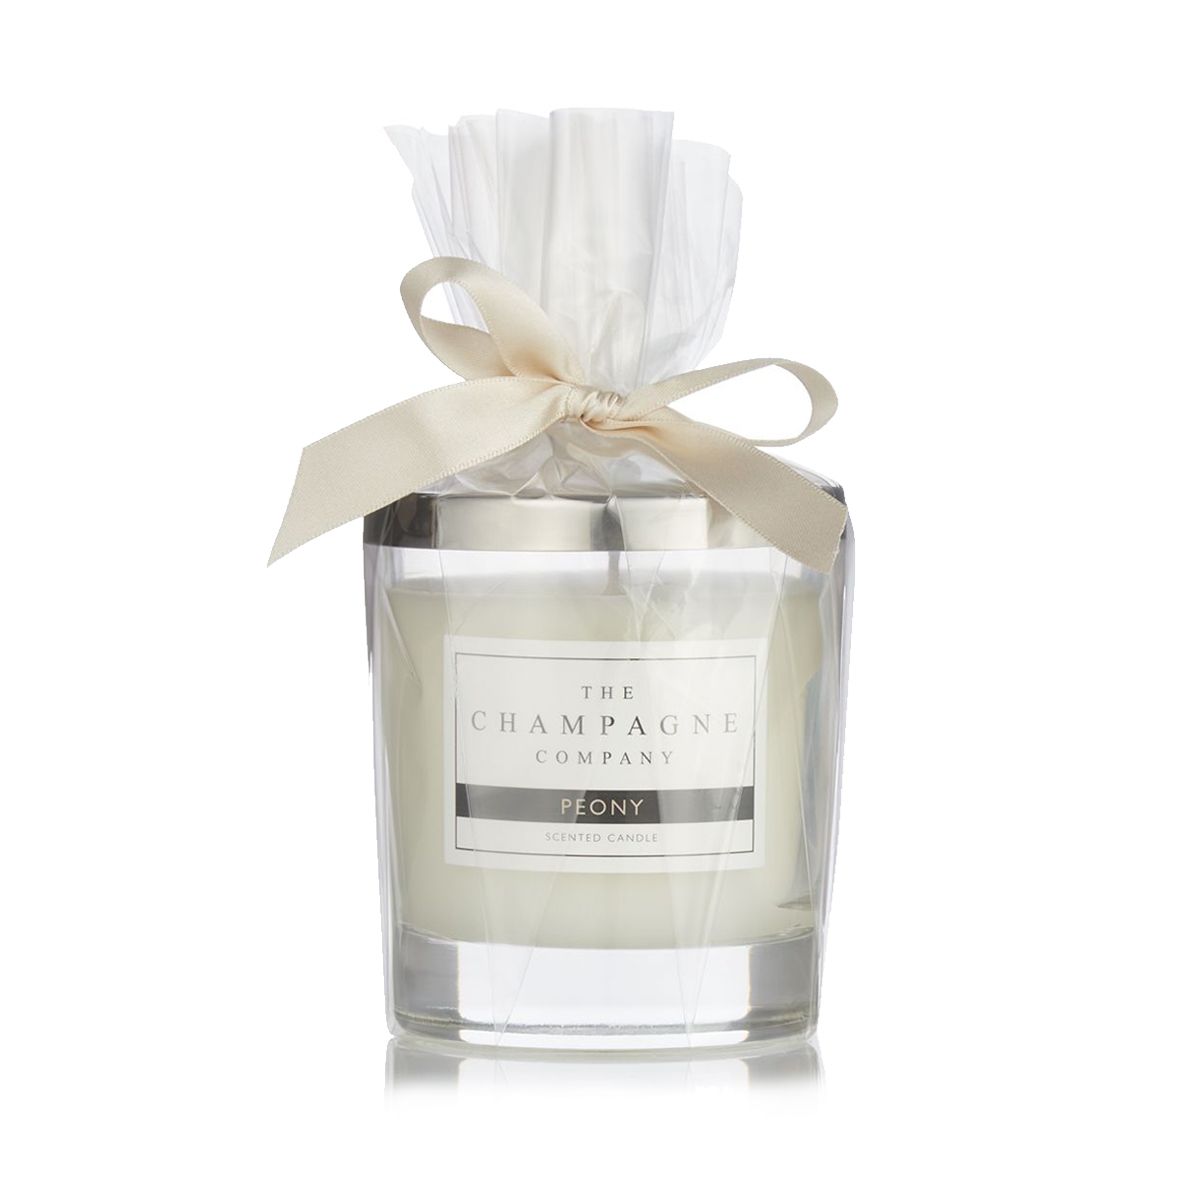 The Champagne Company Peony Home Candle 200g